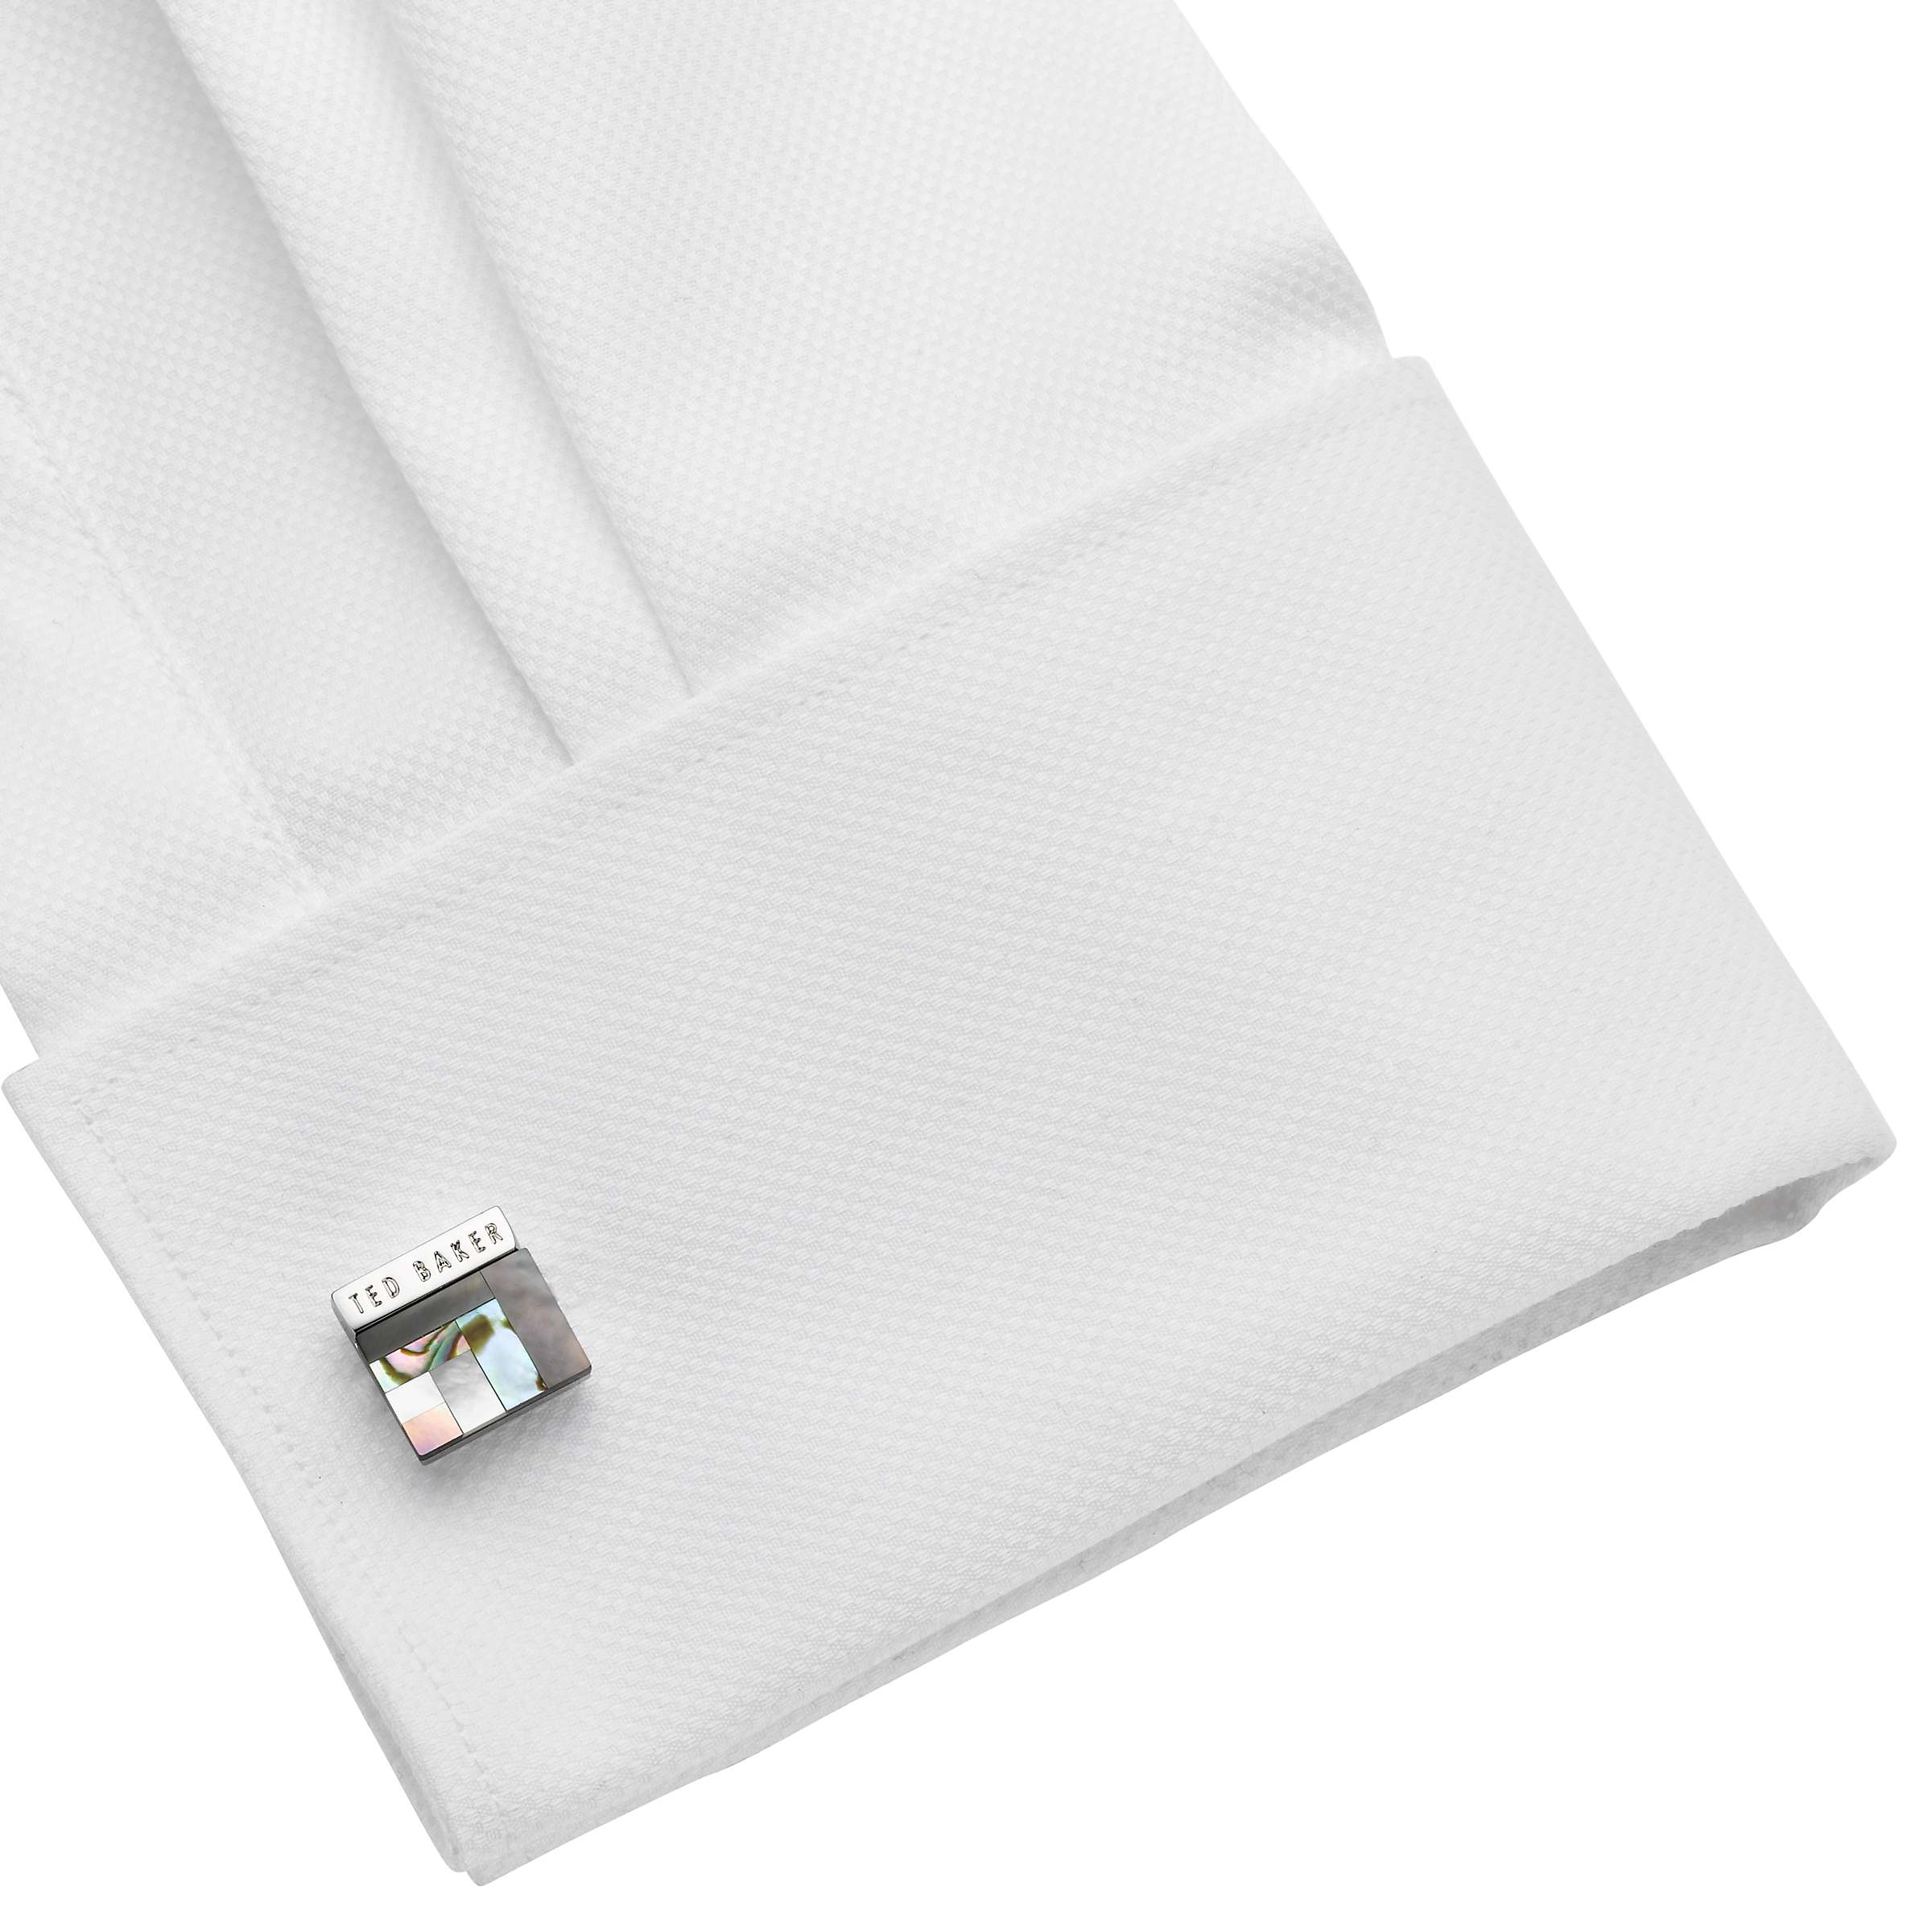 Buy Ted Baker Burro Art Deco Style Square Cufflinks, Grey Online at johnlewis.com